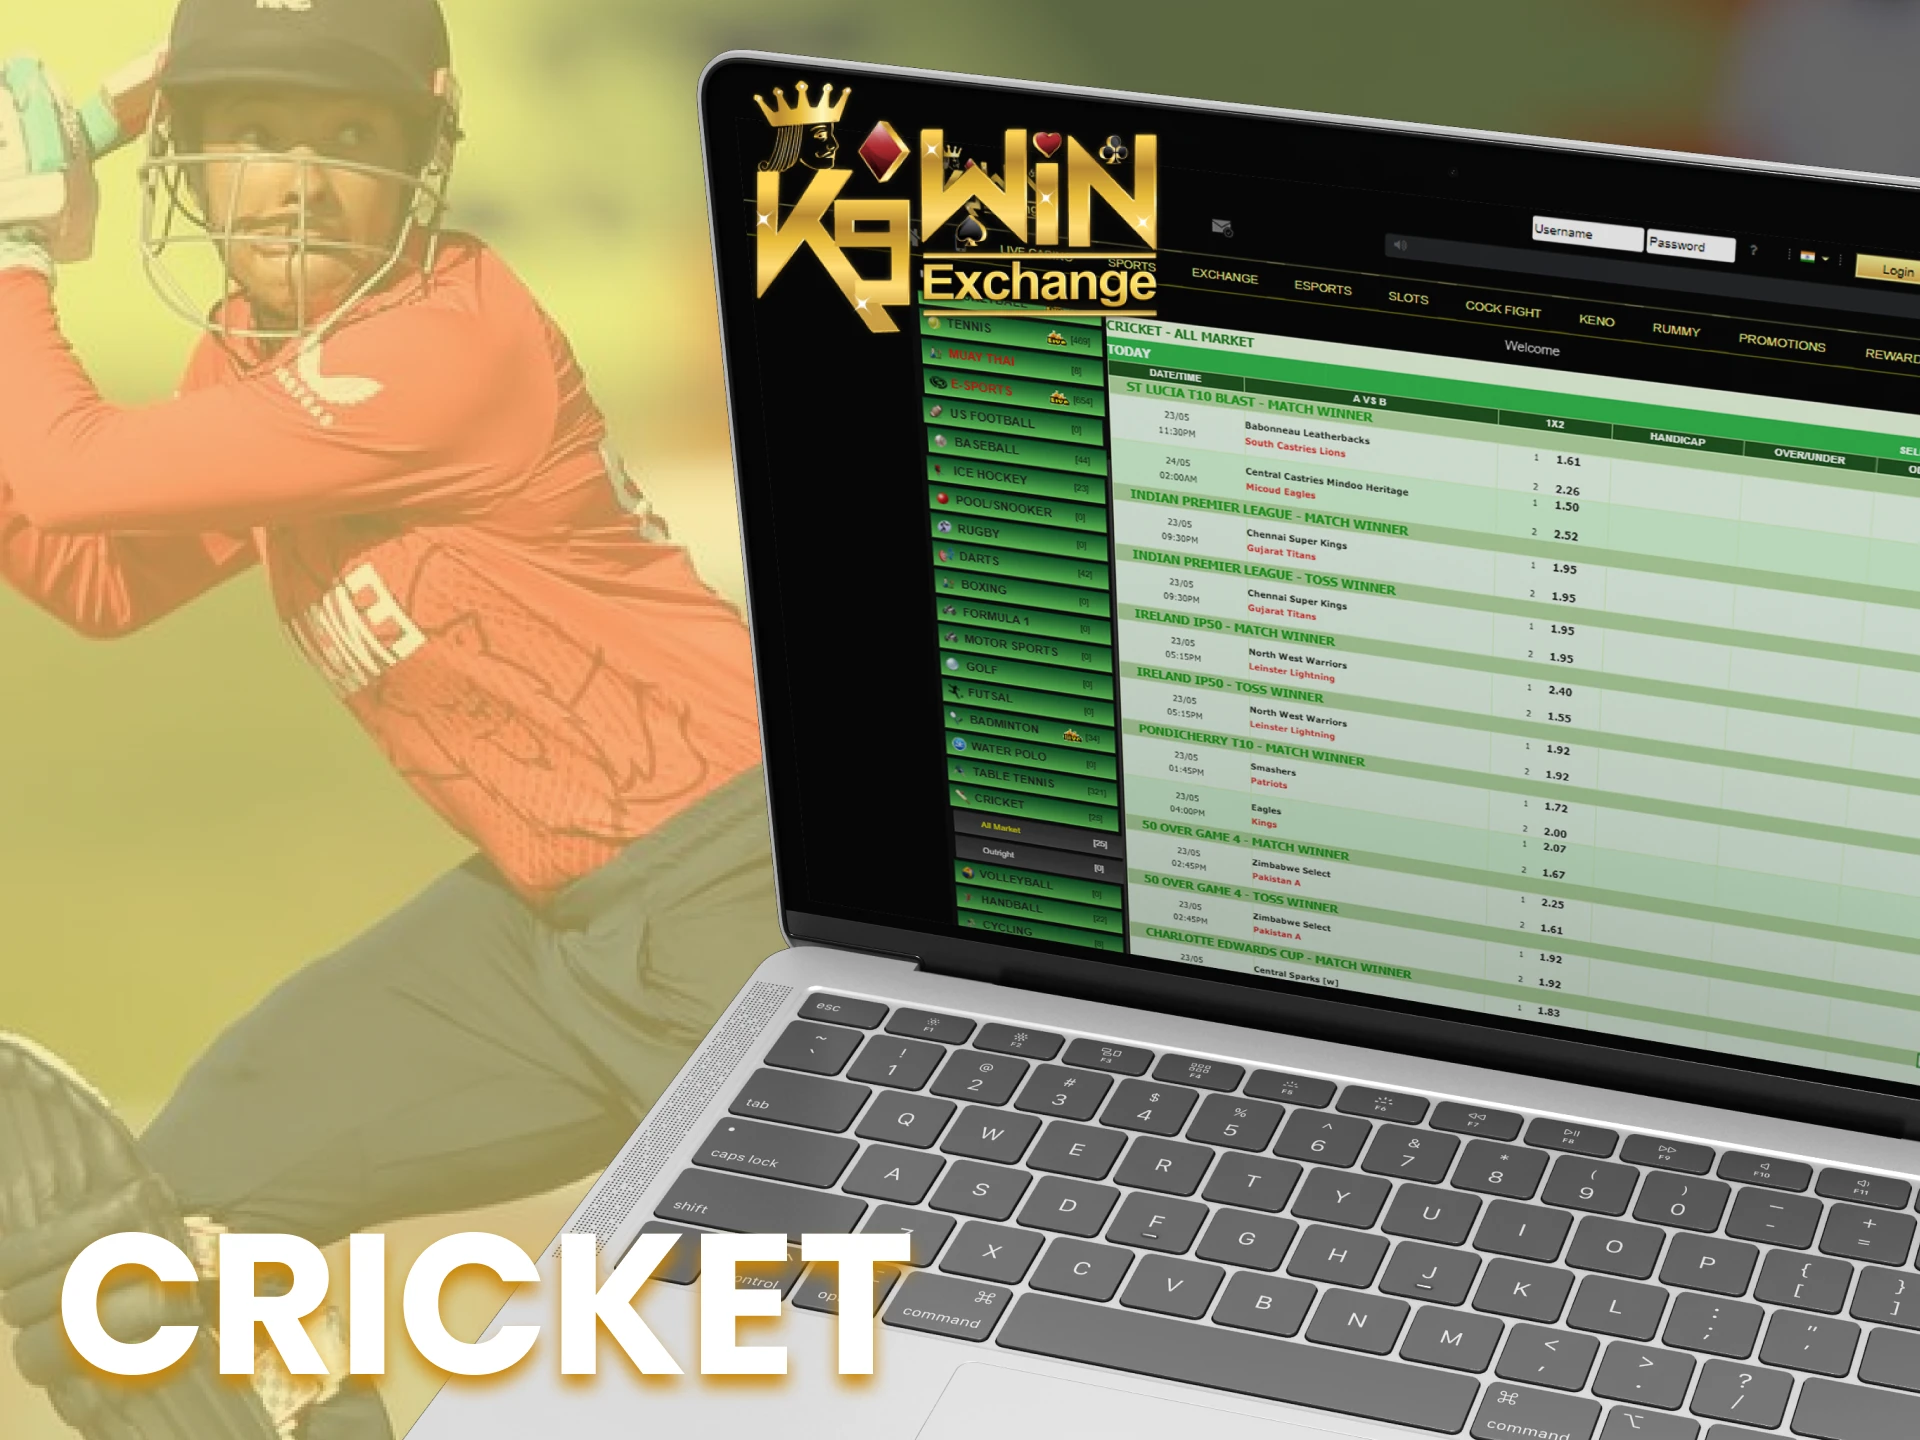 Win money by betting on the popular cricket teams at K9Win.